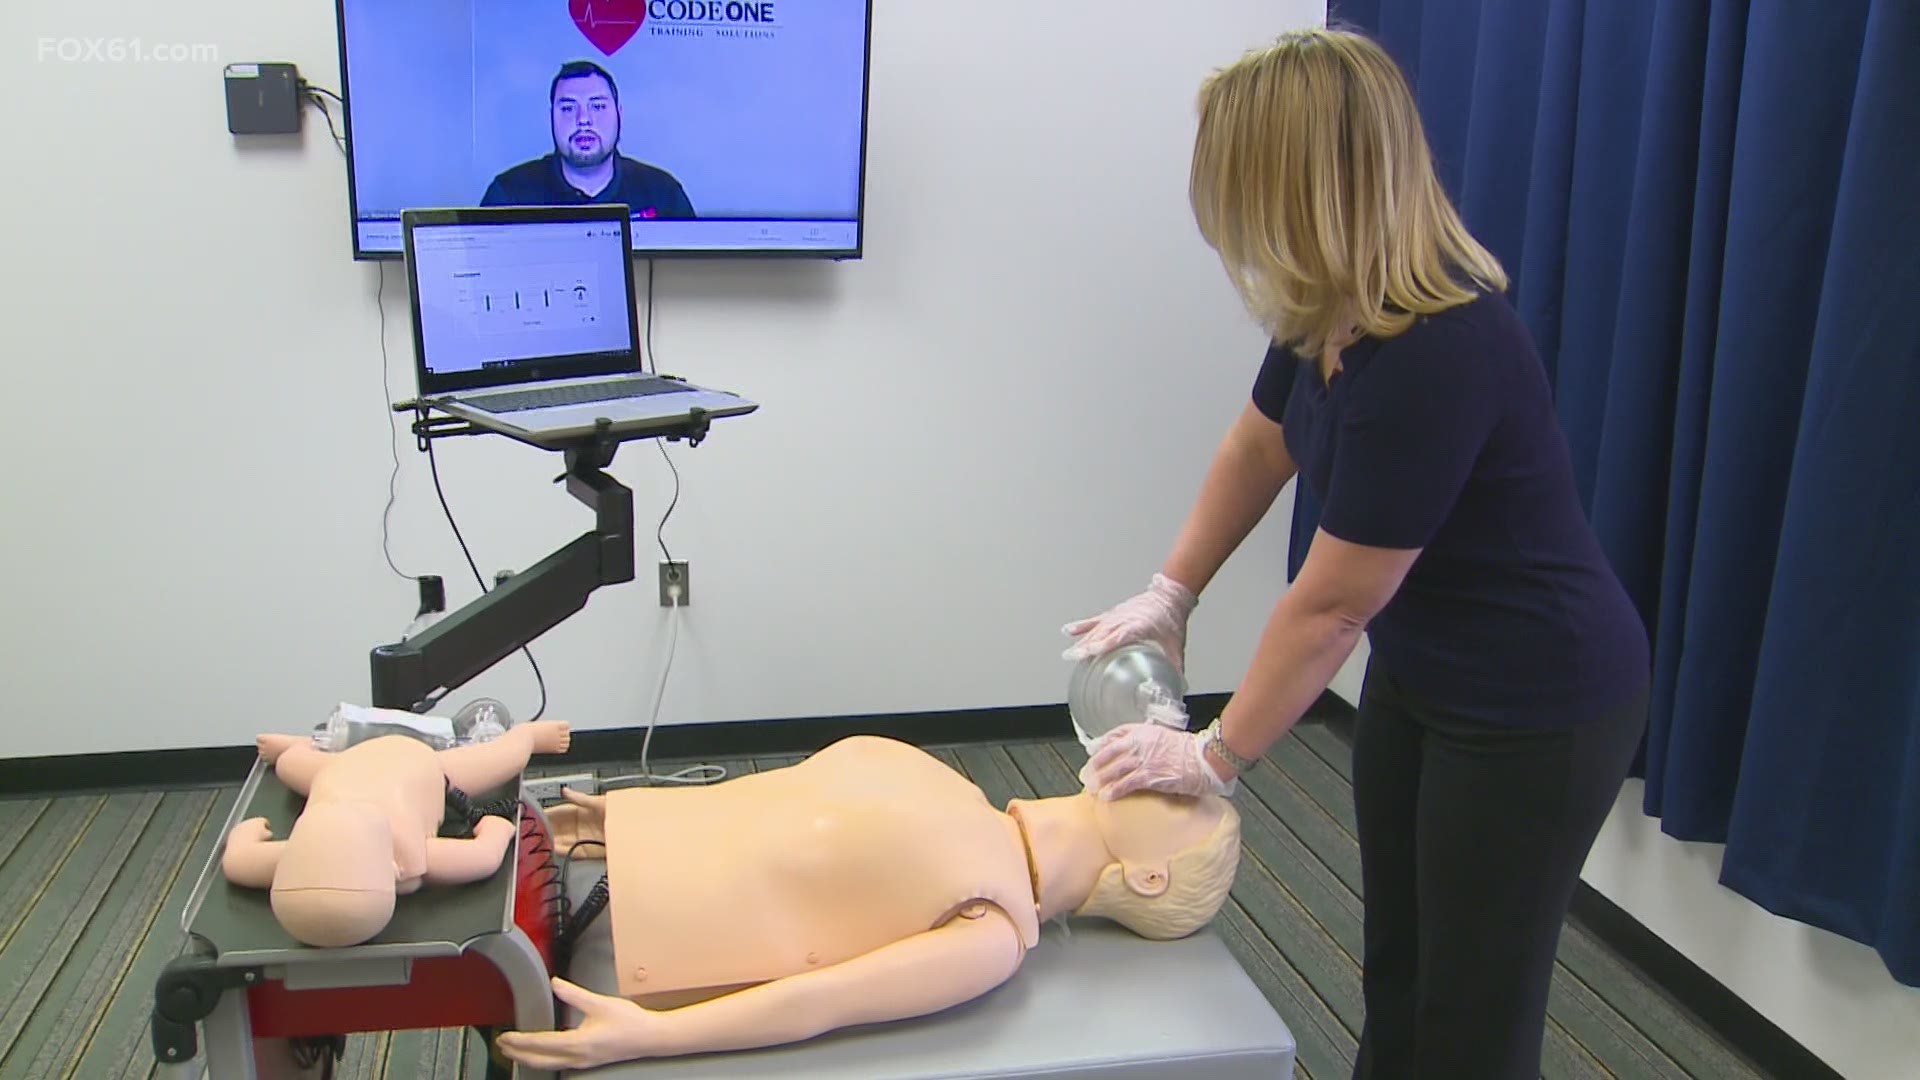 CPR training is largely “compression based” -- no more mouth to mouth resuscitation -- and that helps keep things safer, from COVID and other spreadable diseases.